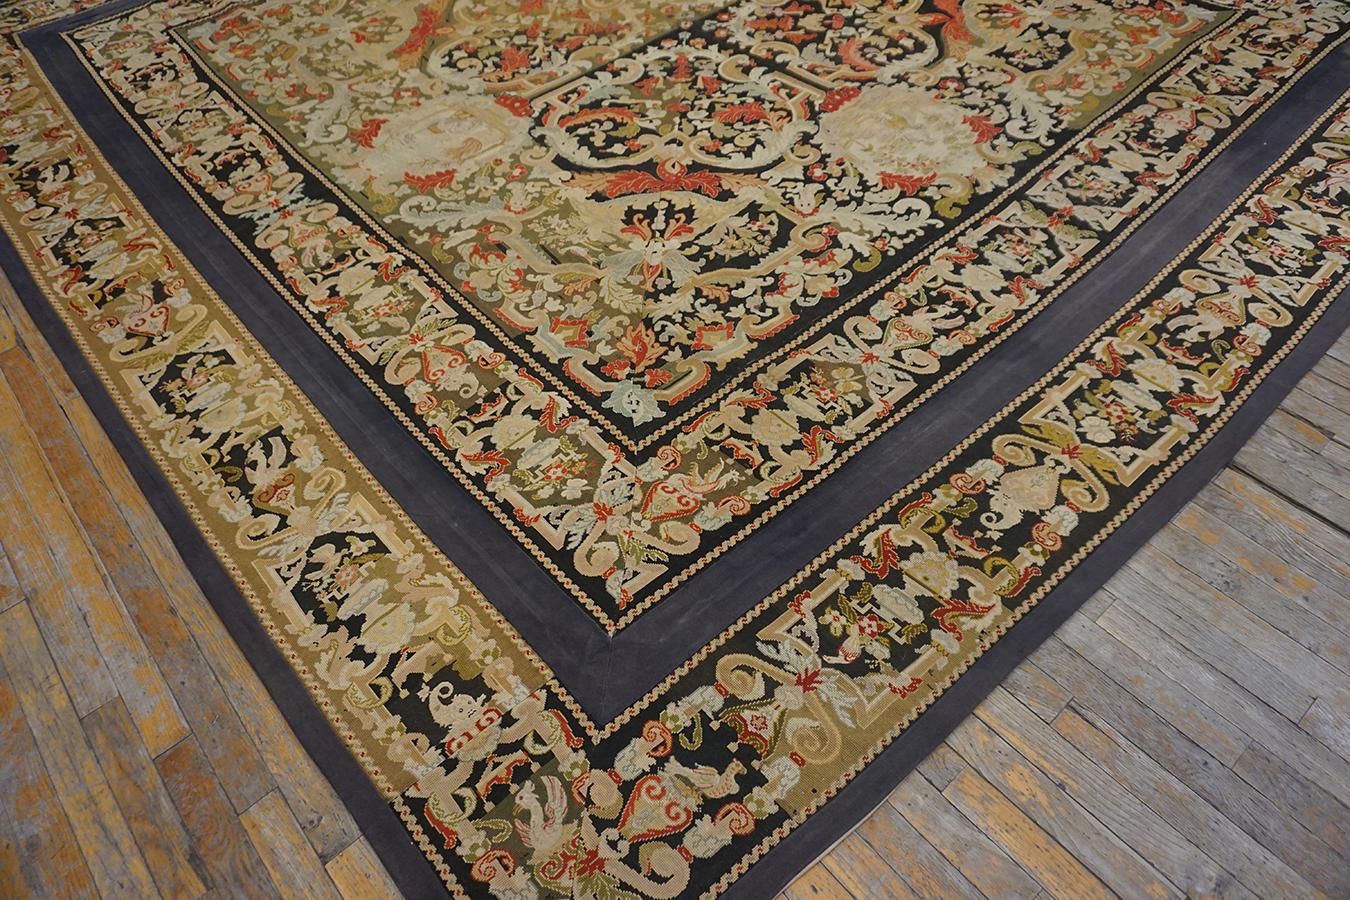 Late 19th Century 19th Century French Needlepoint Carpet ( 11' x 11' - 335 x 335 ) For Sale